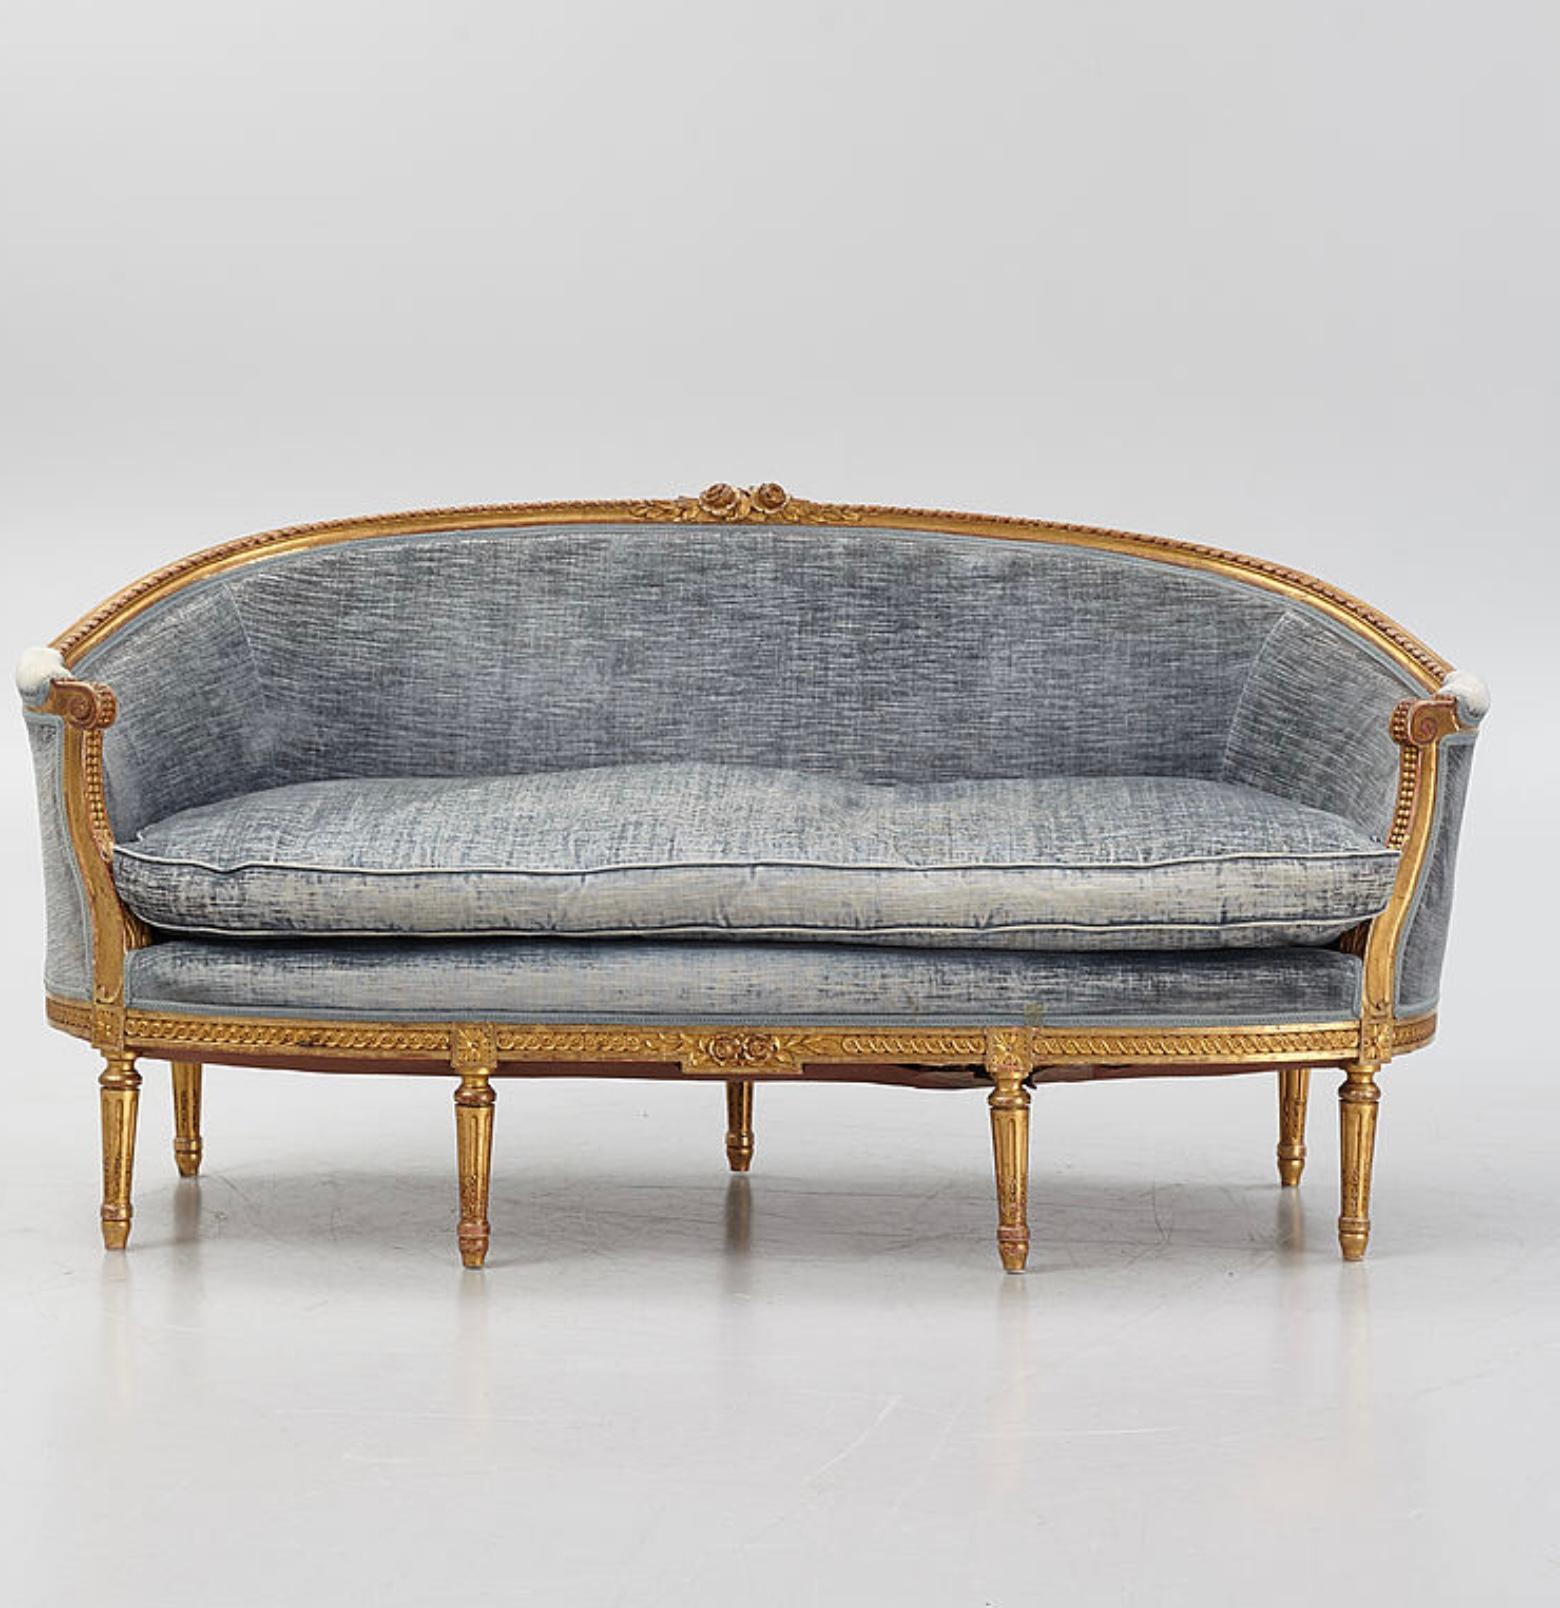 1900s Swedish Two-Seater Gustavian Style Gilt Velvet Sofa with Carved Decoration For Sale 4